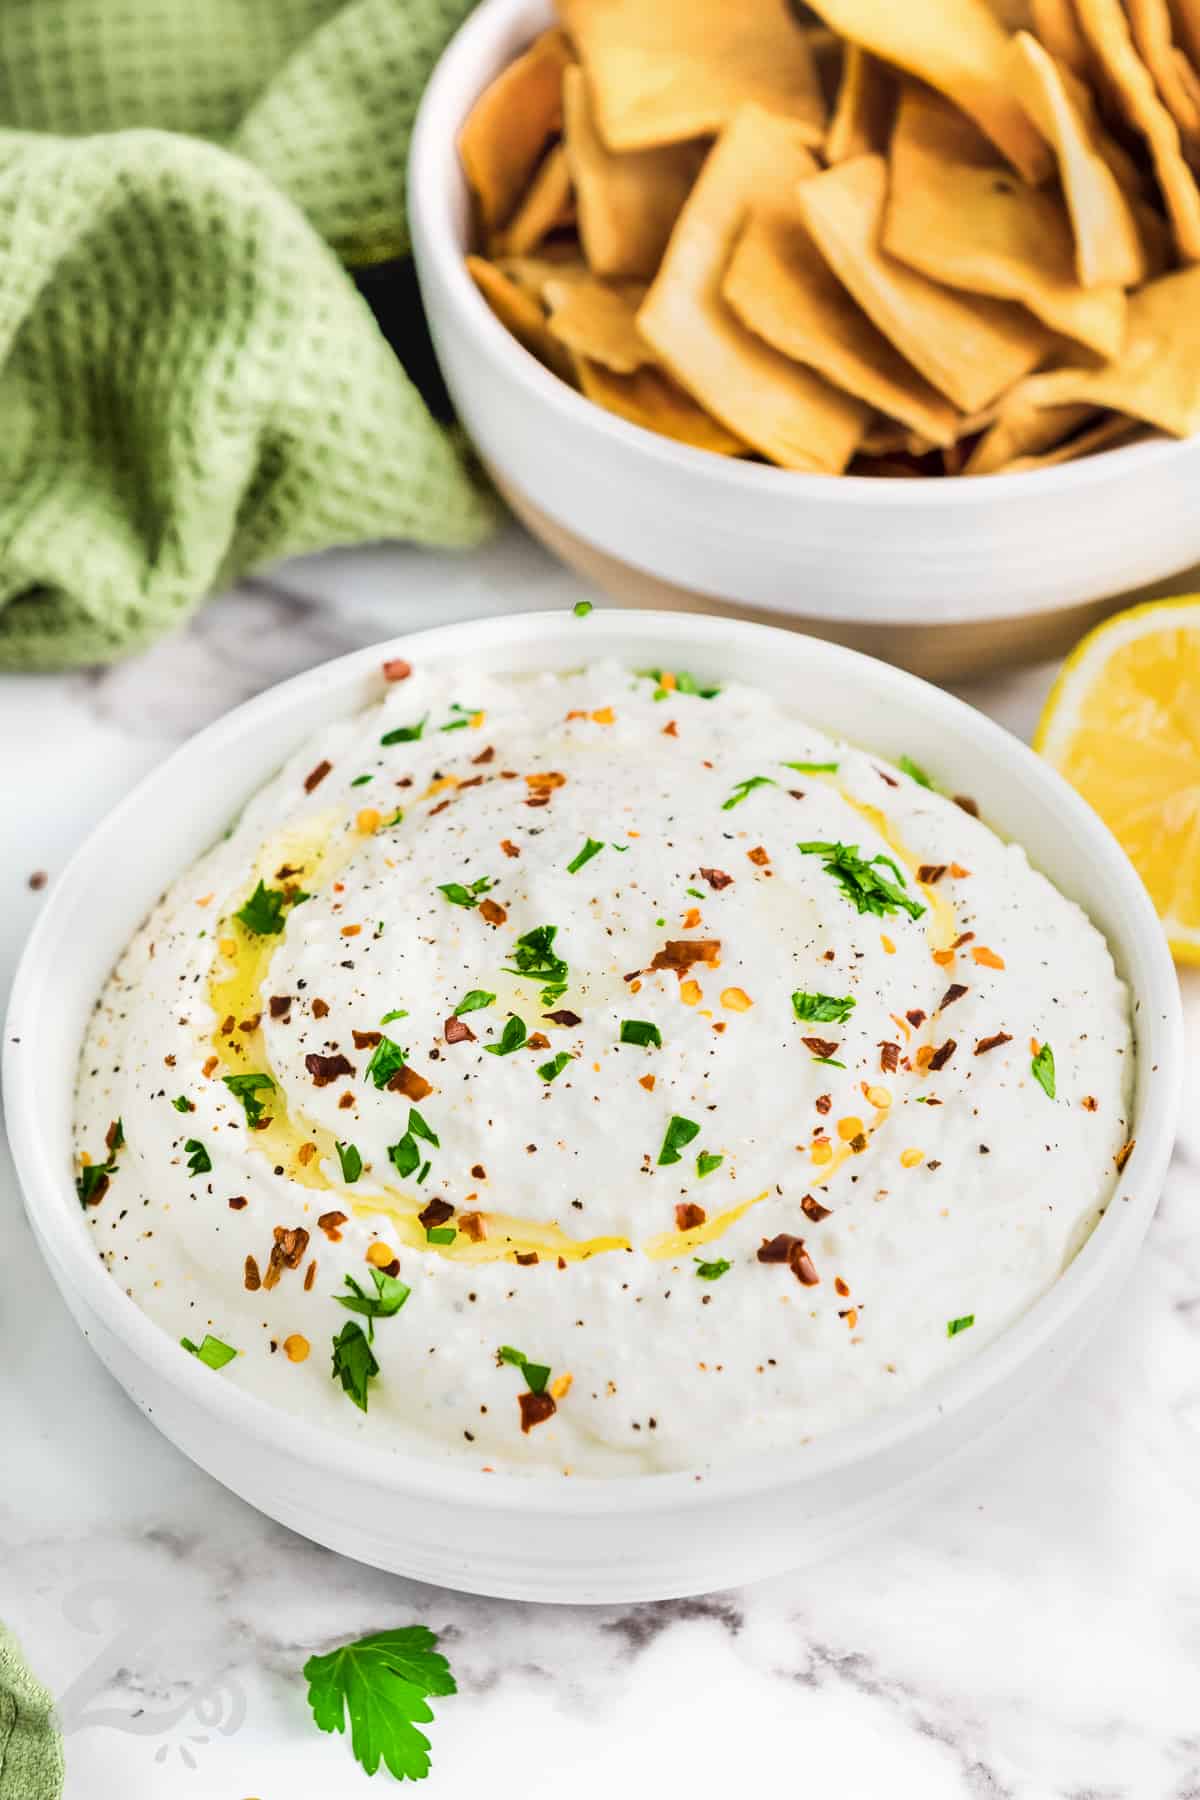 crackers in a bowl along with whipped feta dip